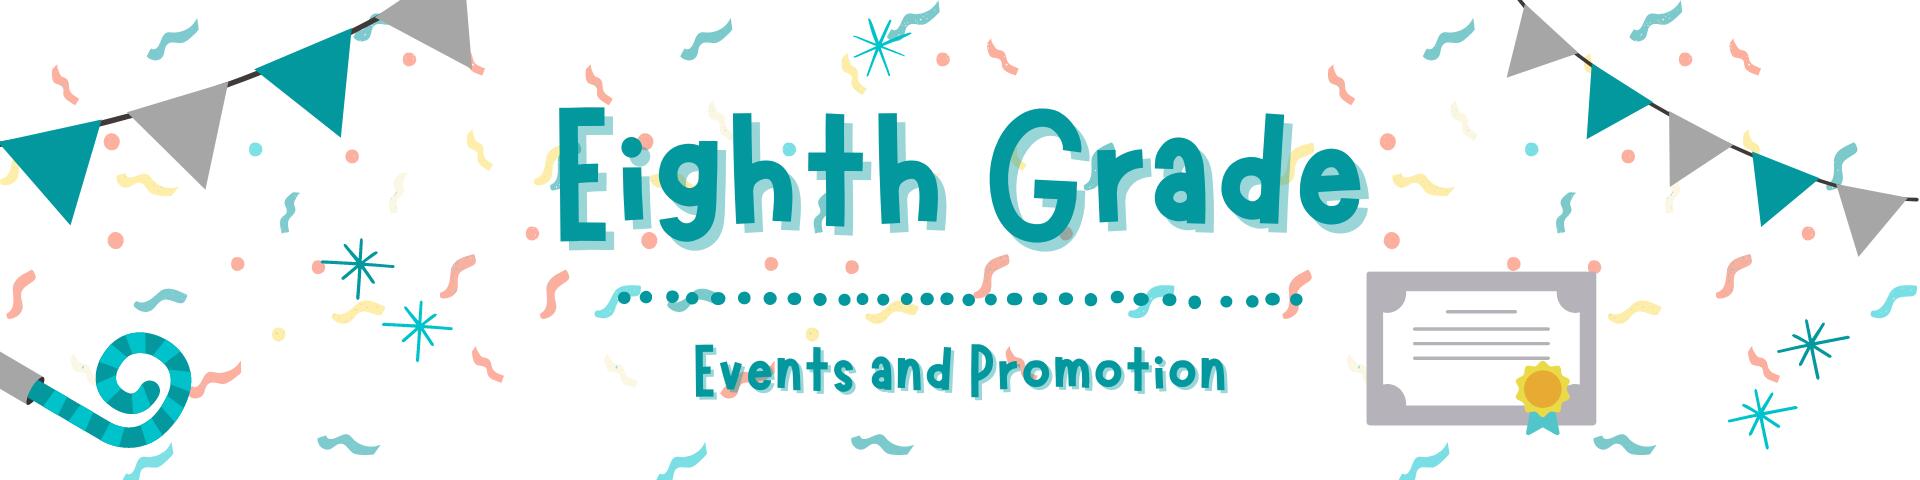 8th Grade Events and Promotions banner